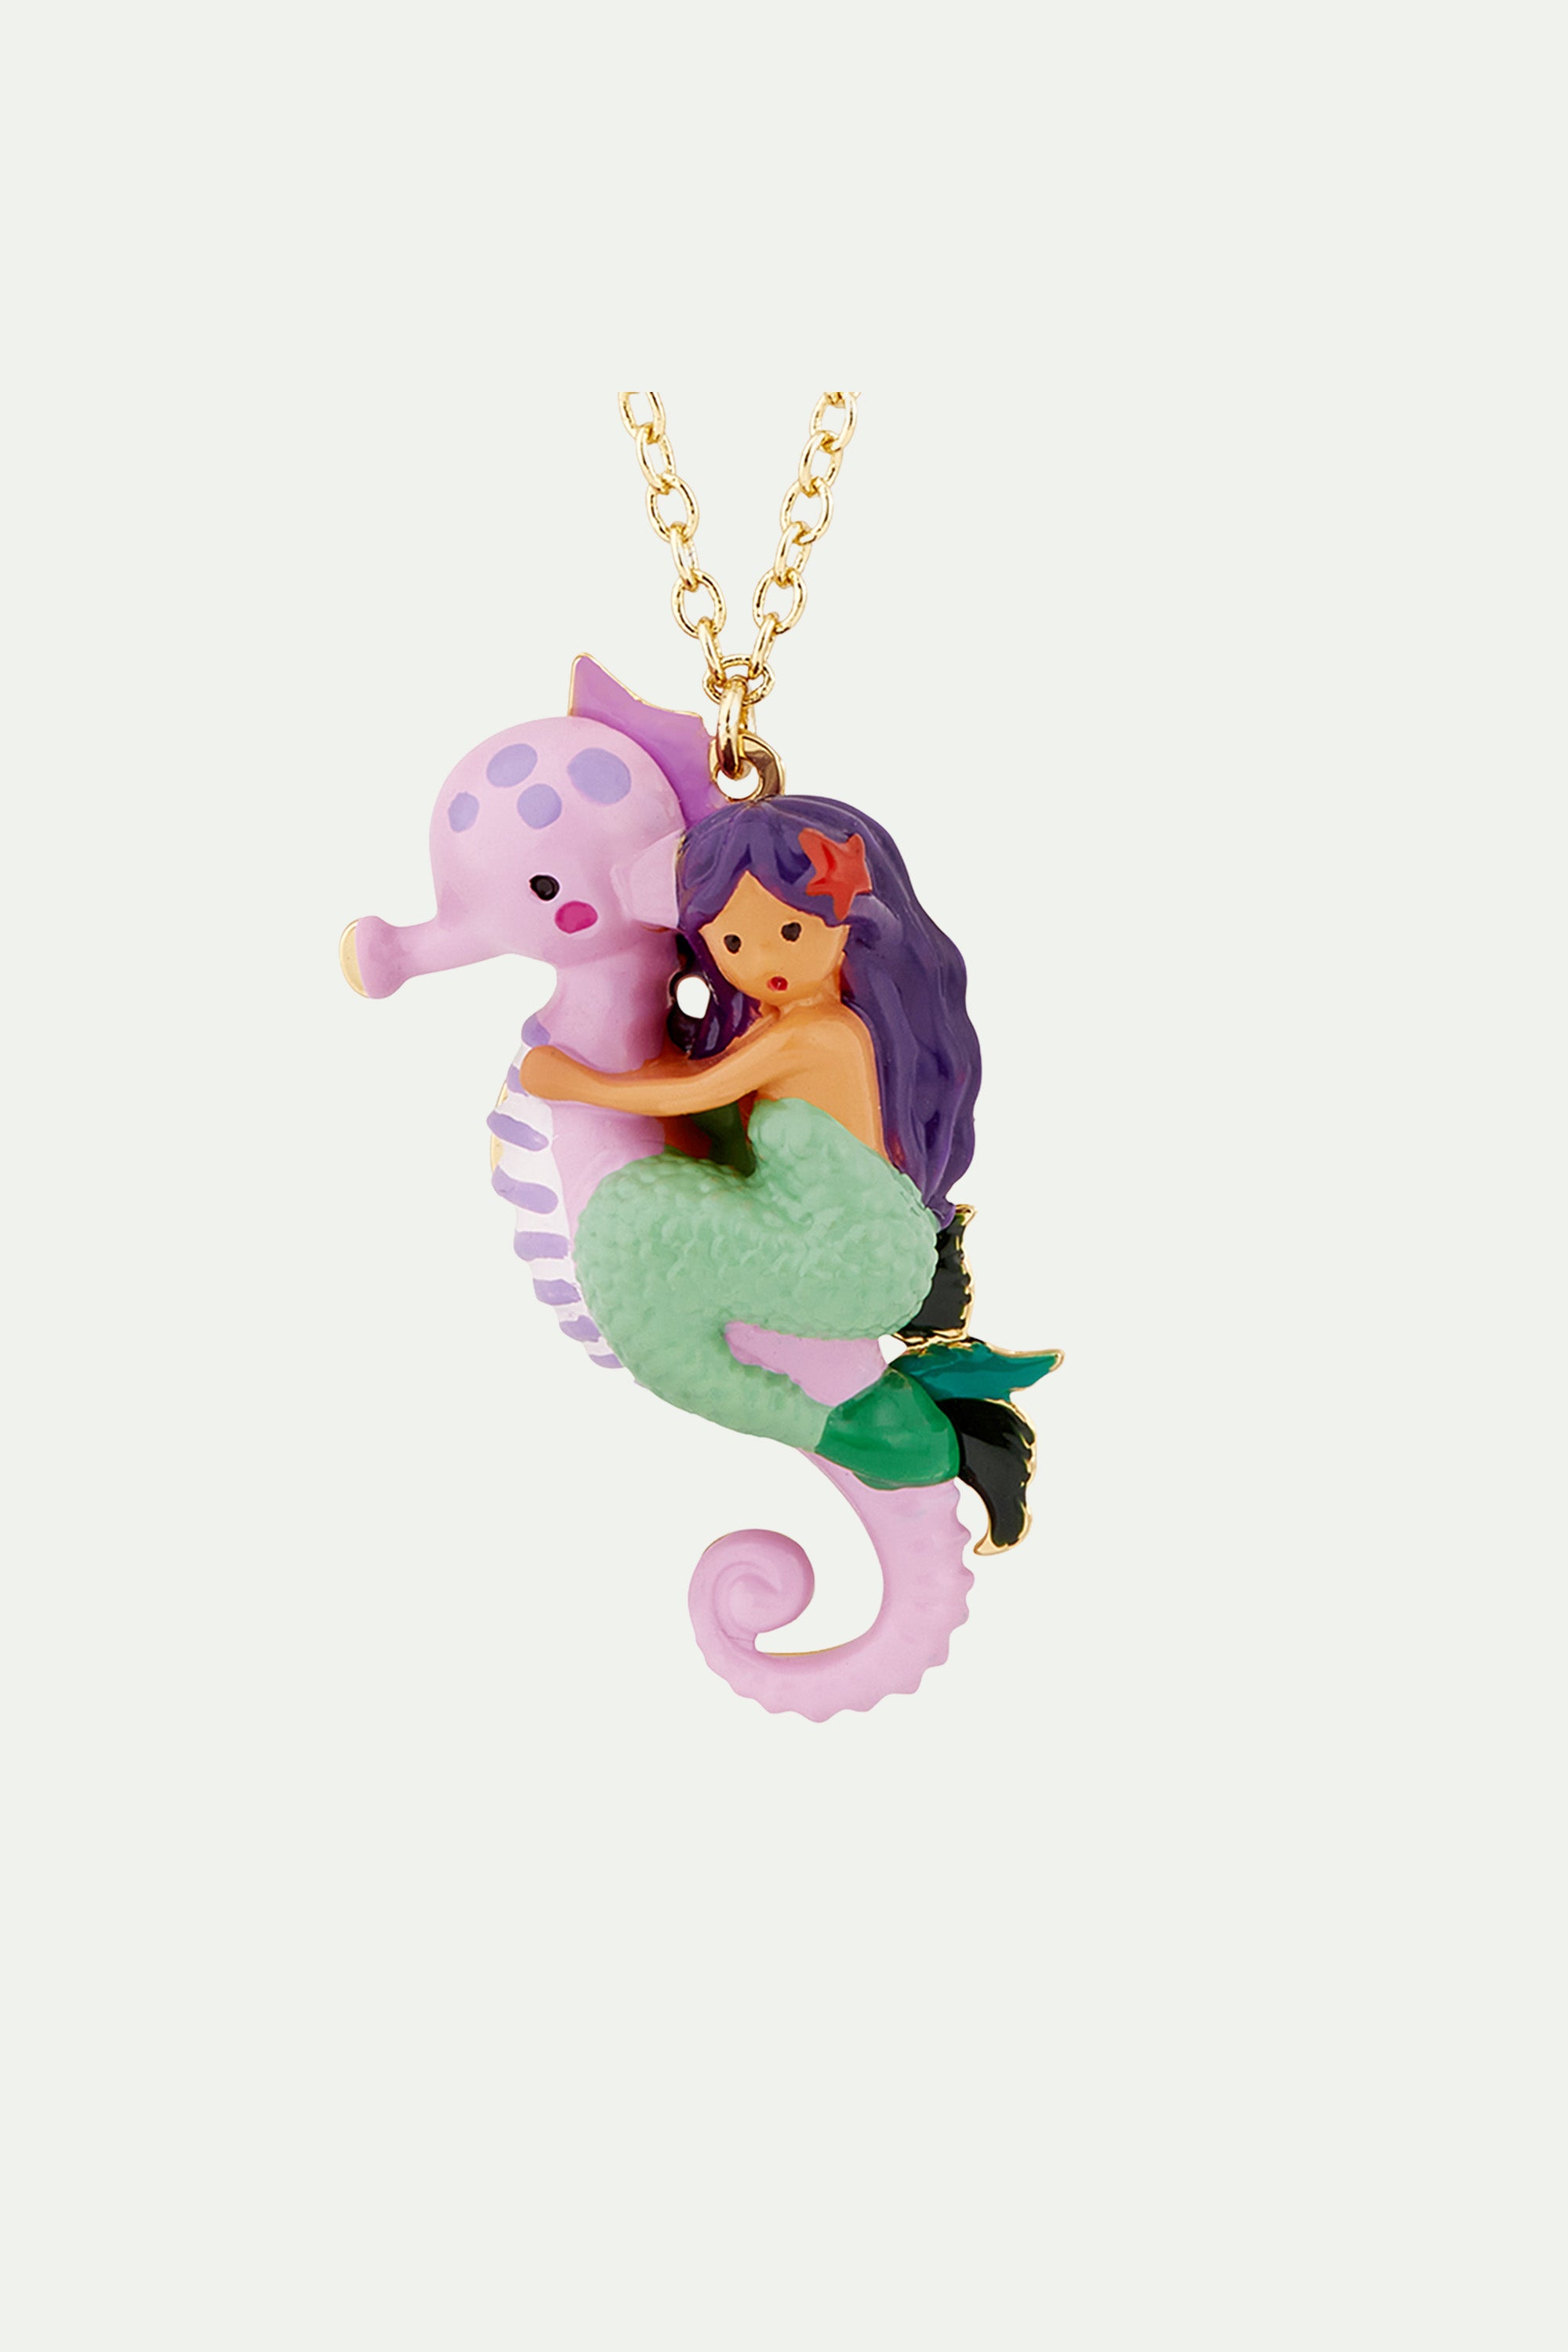 Mermaid and seahorse pendant necklace